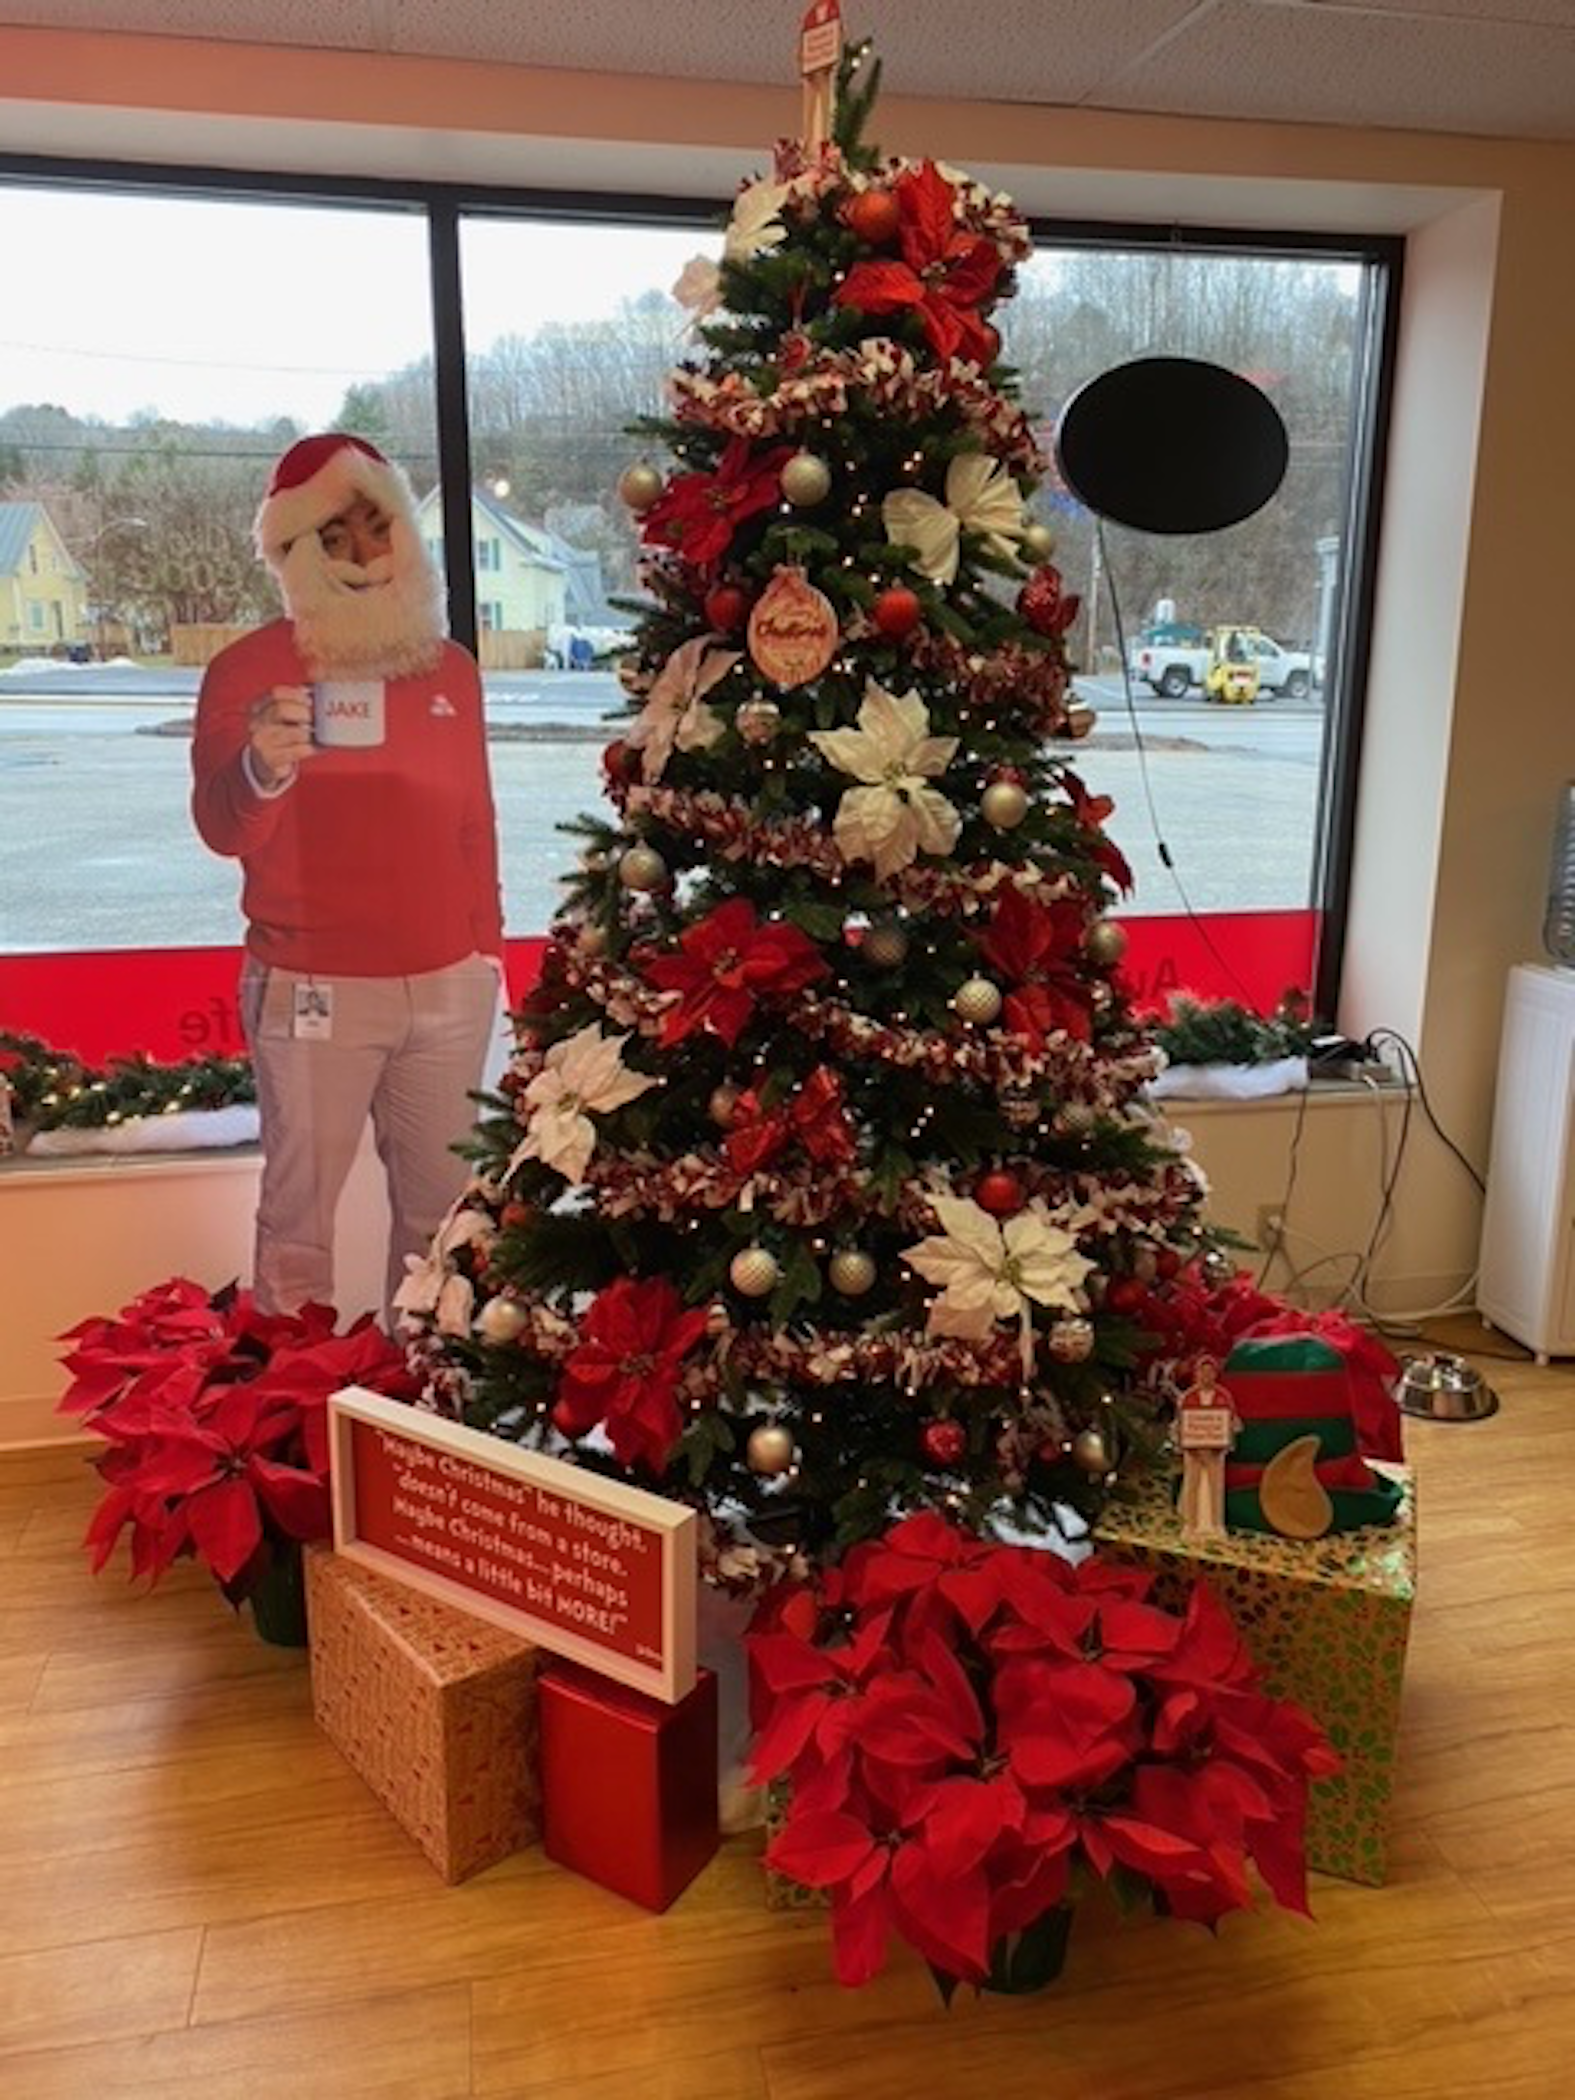 Happy Holidays from all of us at Bob Bartlett State Farm